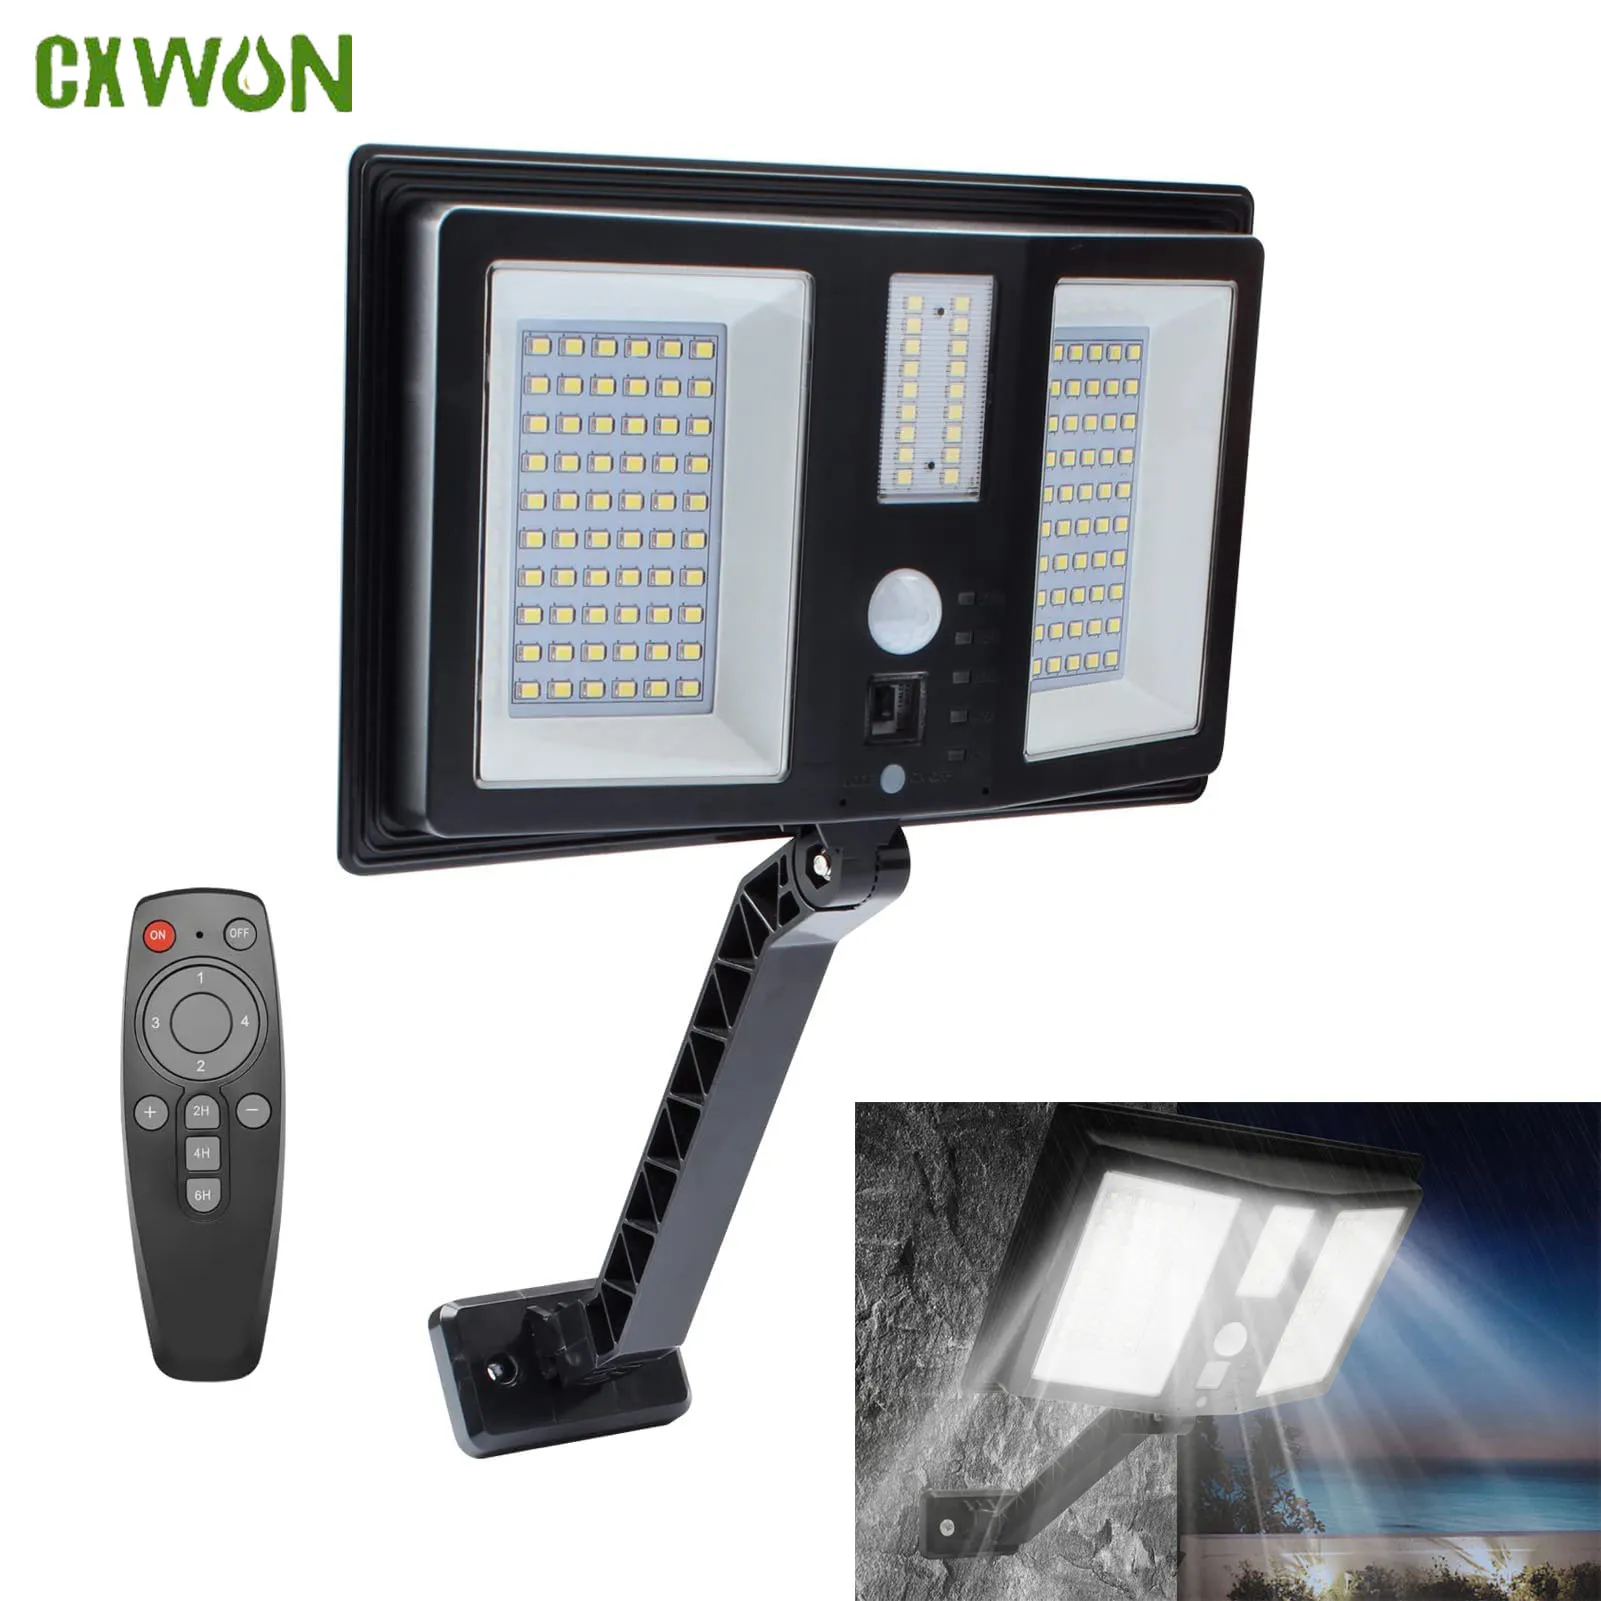 

Outdoor Solar Sensor Lights 138 LED Waterproof Wireless Garden Floodlight with Remote Control for Patio Yard Solar Shed Light